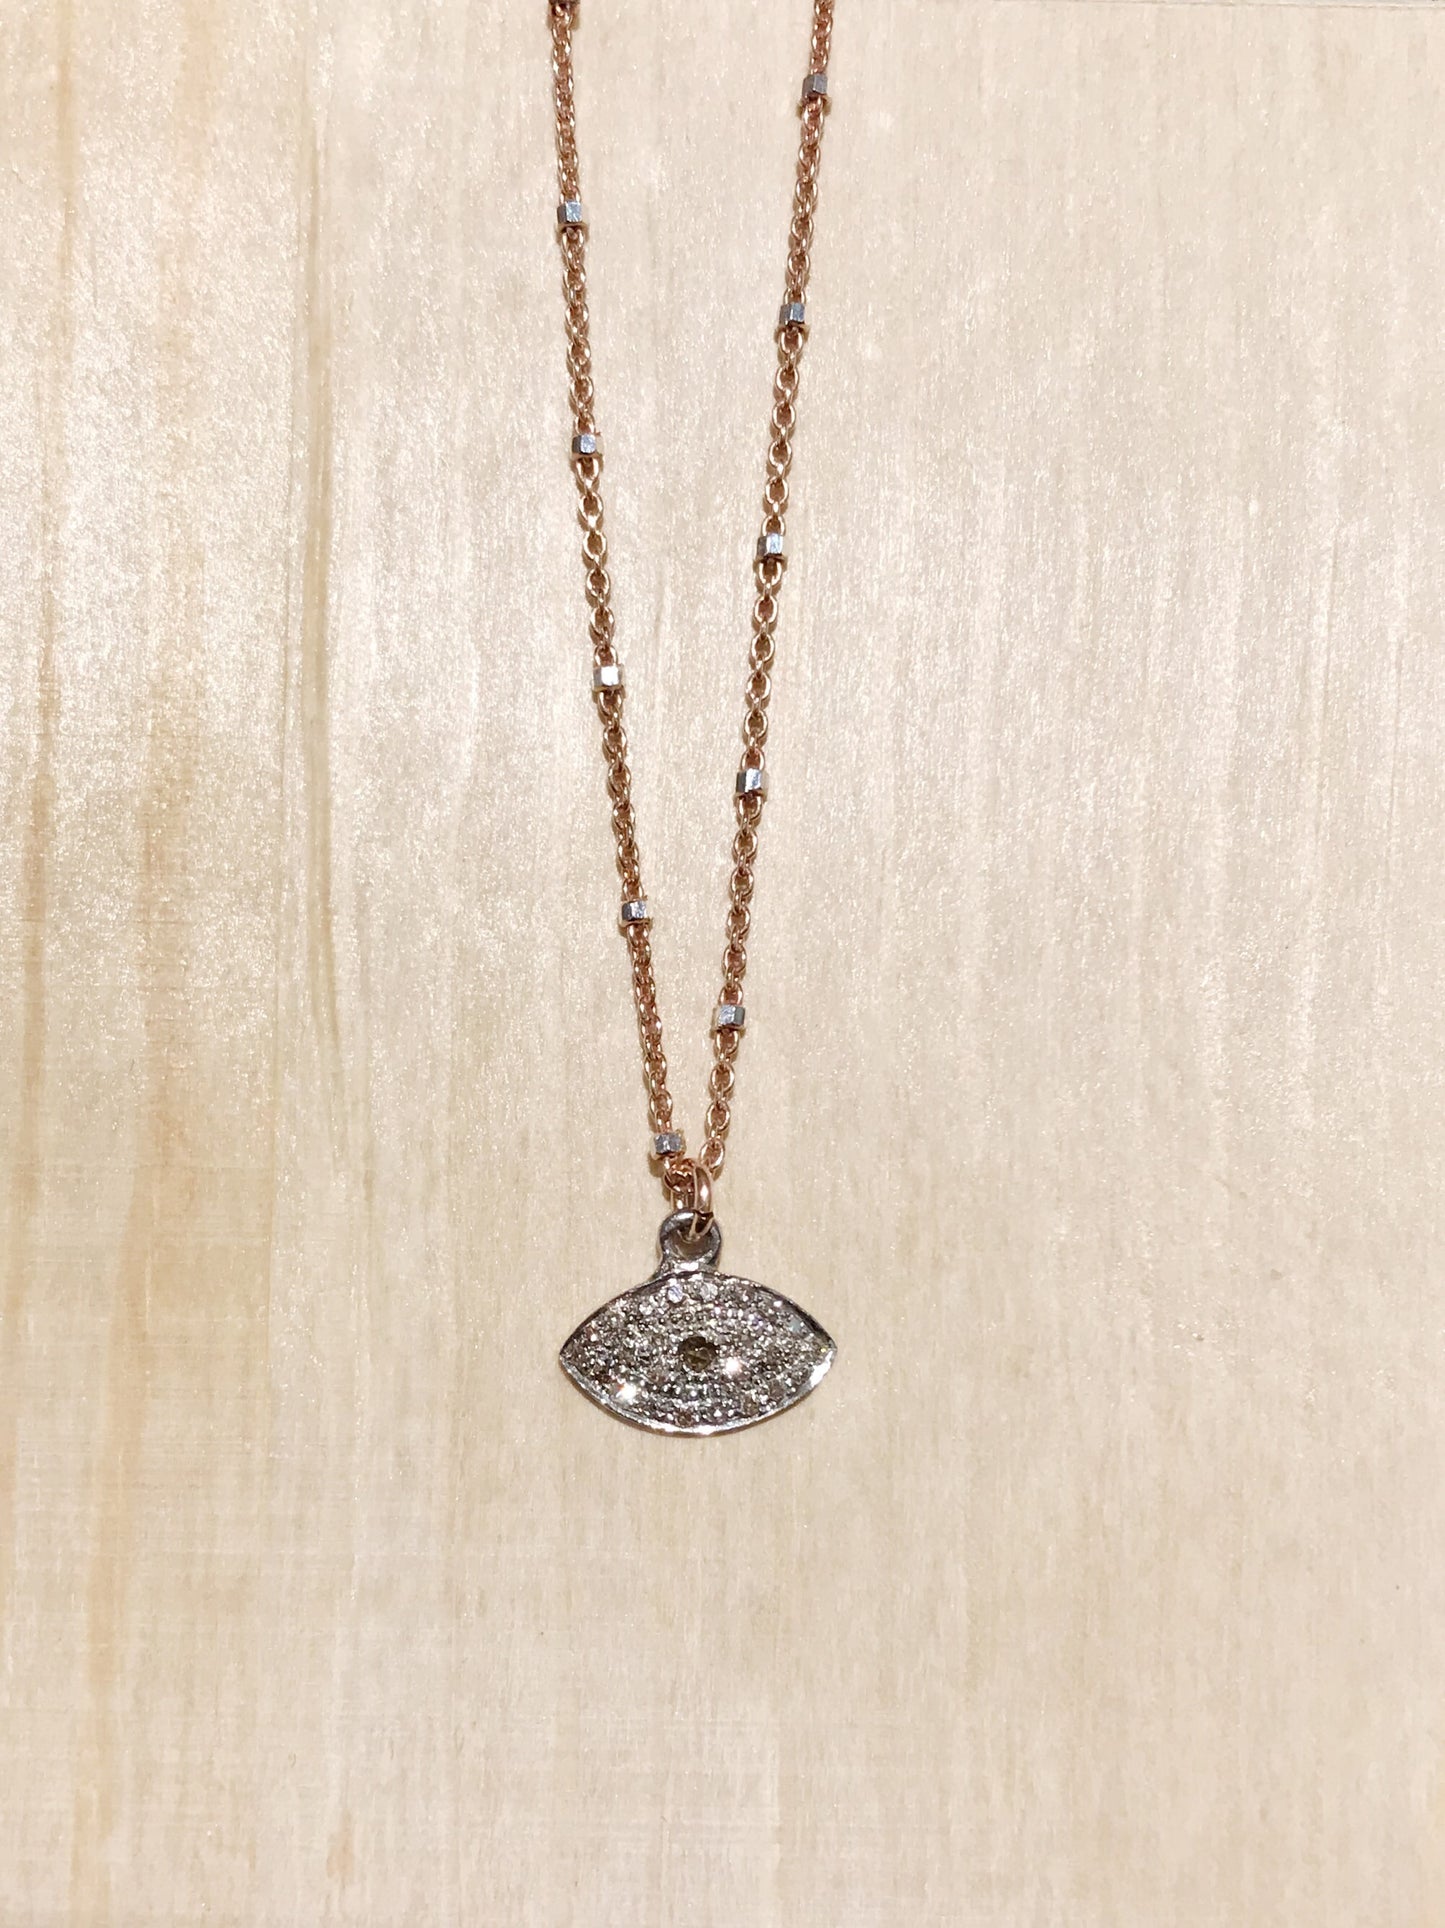 The Third Eye - Pave Diamond Necklace in Rose Gold